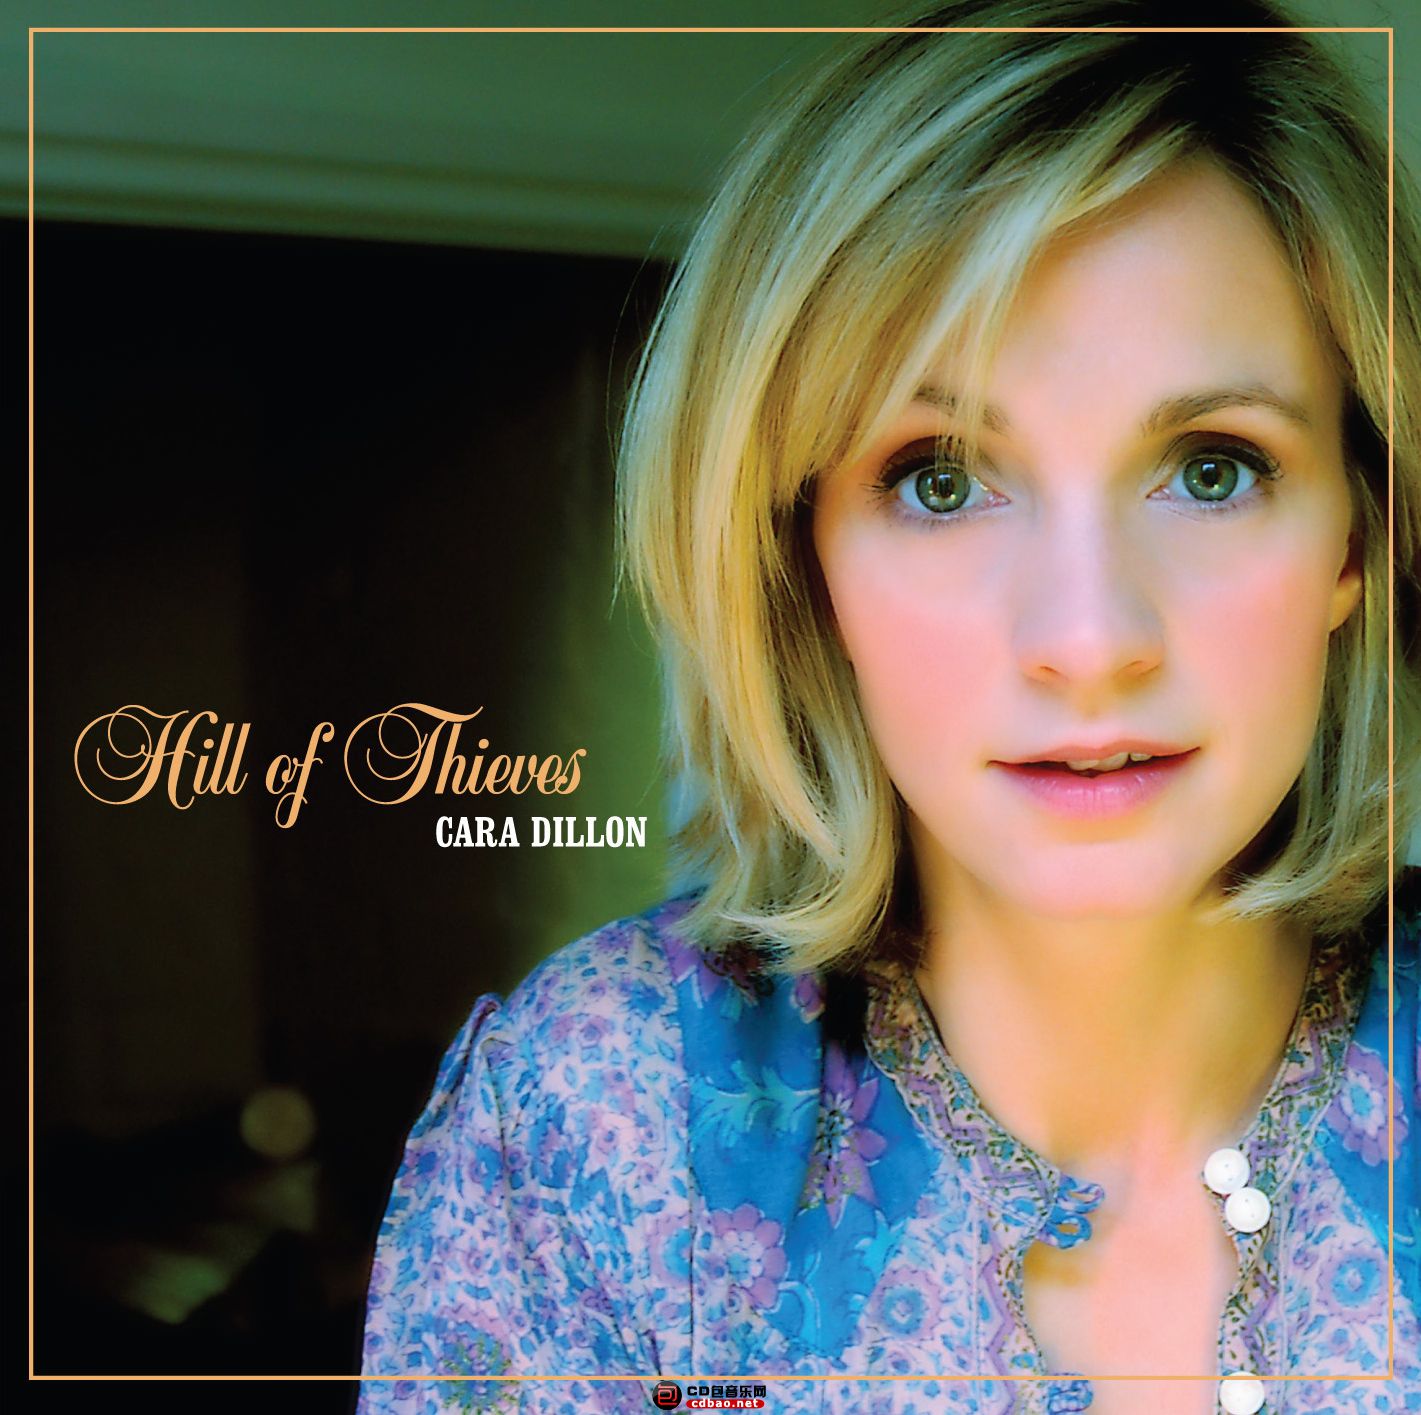 cara dillon - hill of thieves - front.jpg